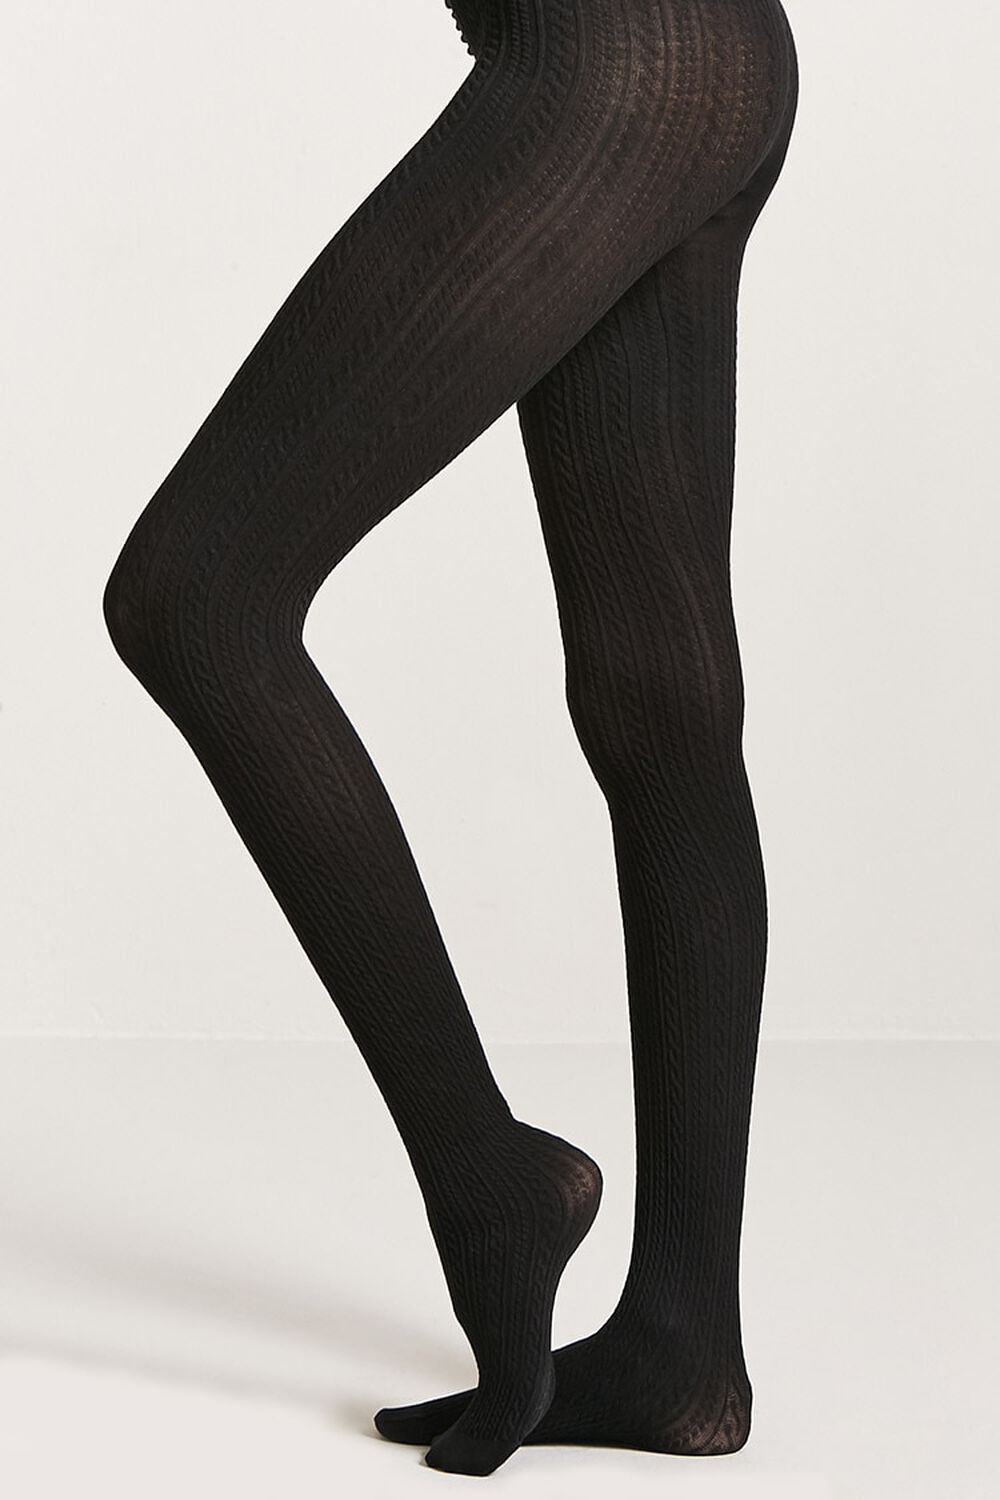 Buy Black Cable Knit Tights - XL, Tights